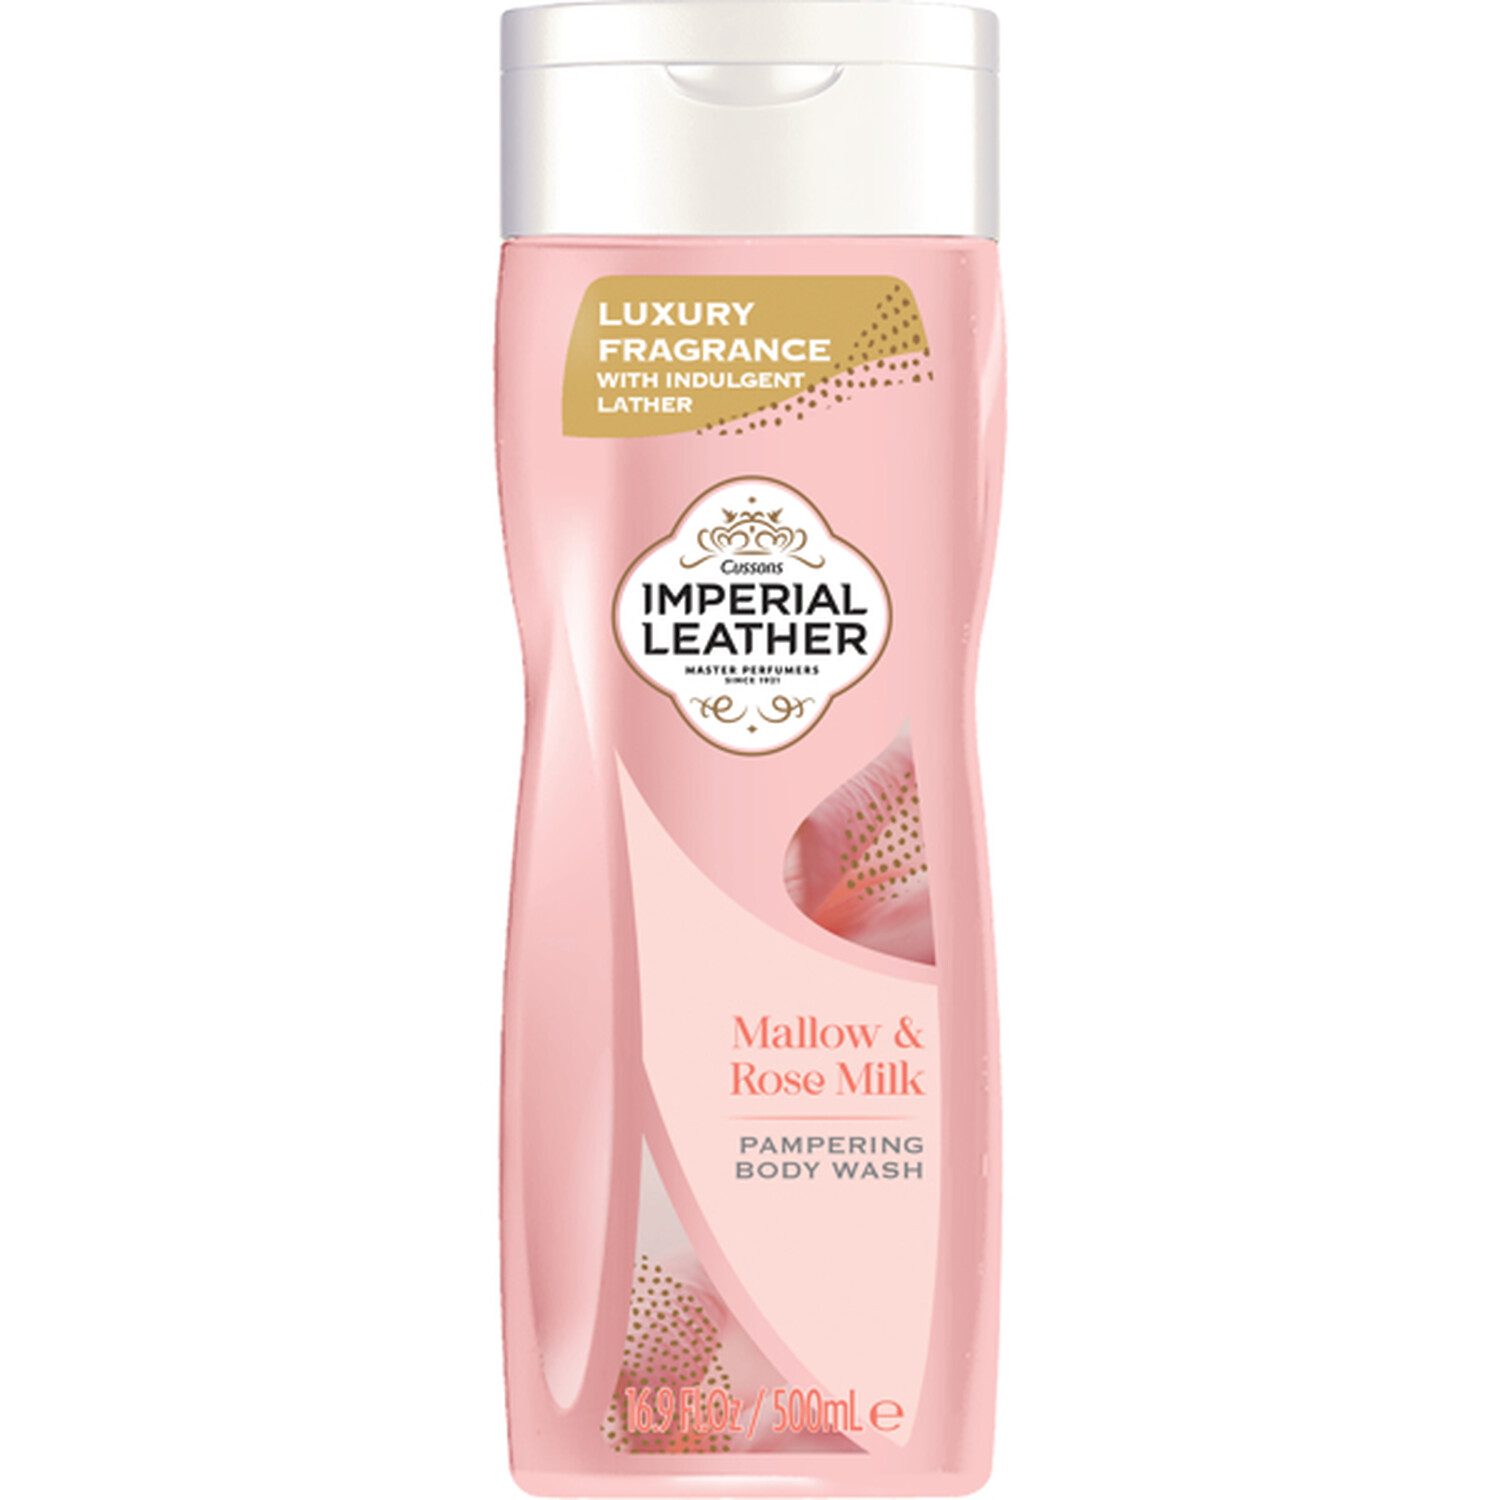 Imperial Leather Mallow and Rose Milk Pampering Body Wash 500ml - Pink Image